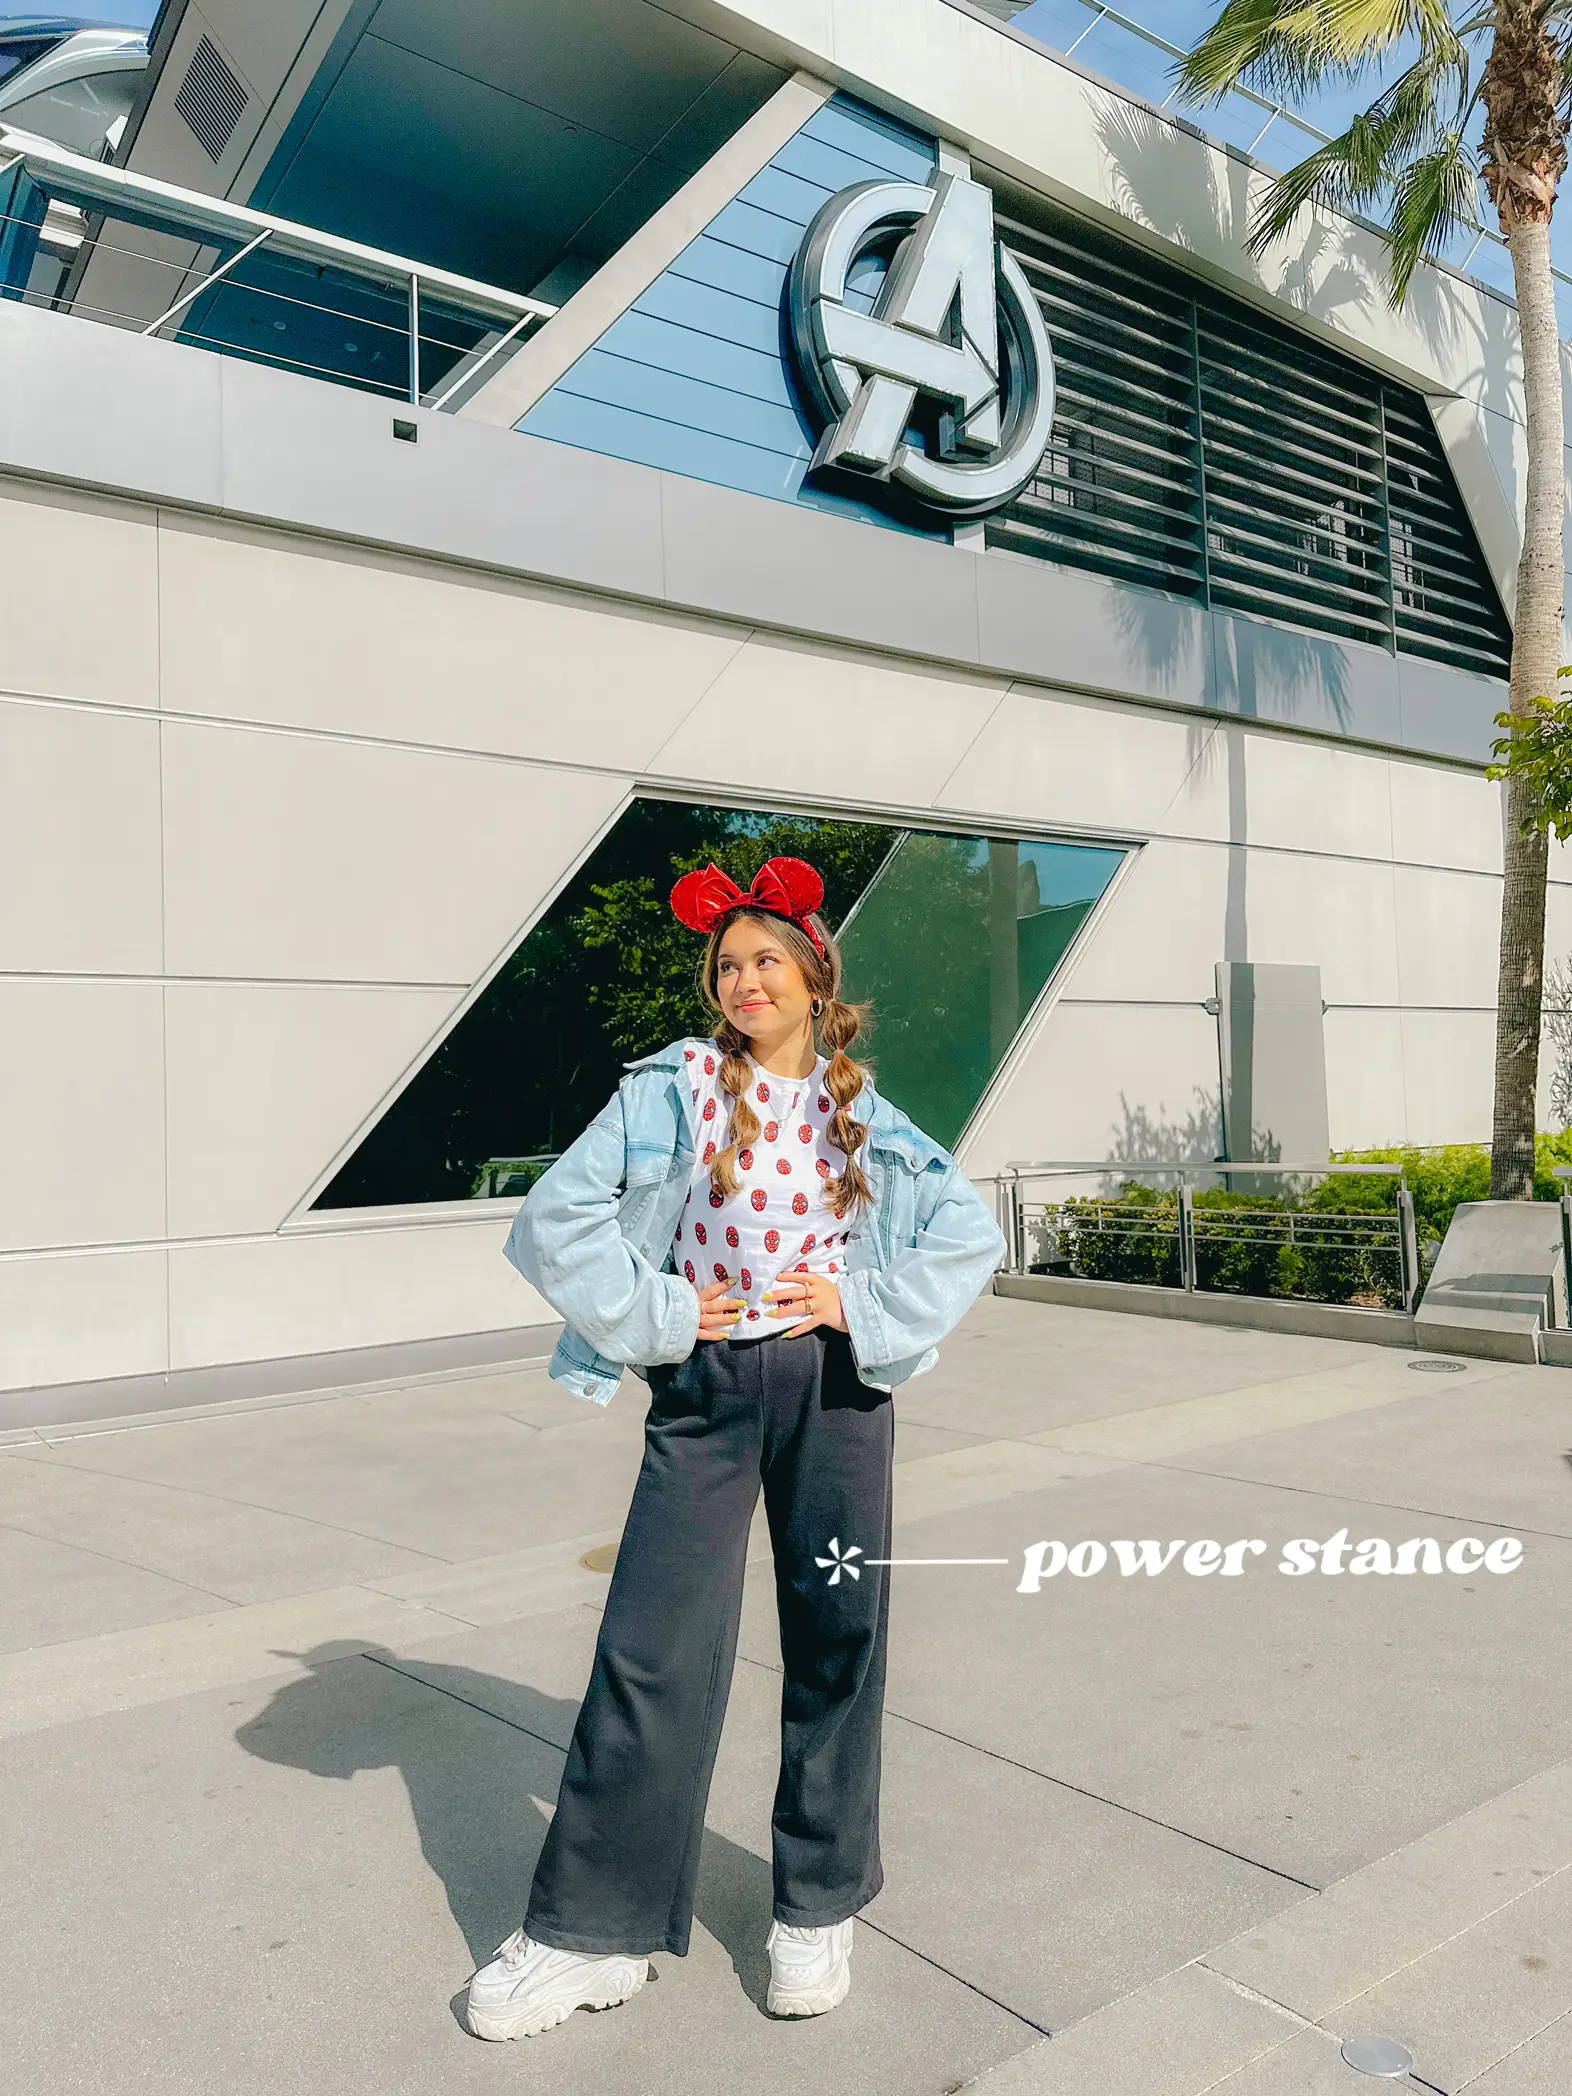  A woman wearing a blue shirt and jeans is standing in front of a building. She is wearing a Mickey Mouse headband and has her arms outstretched.